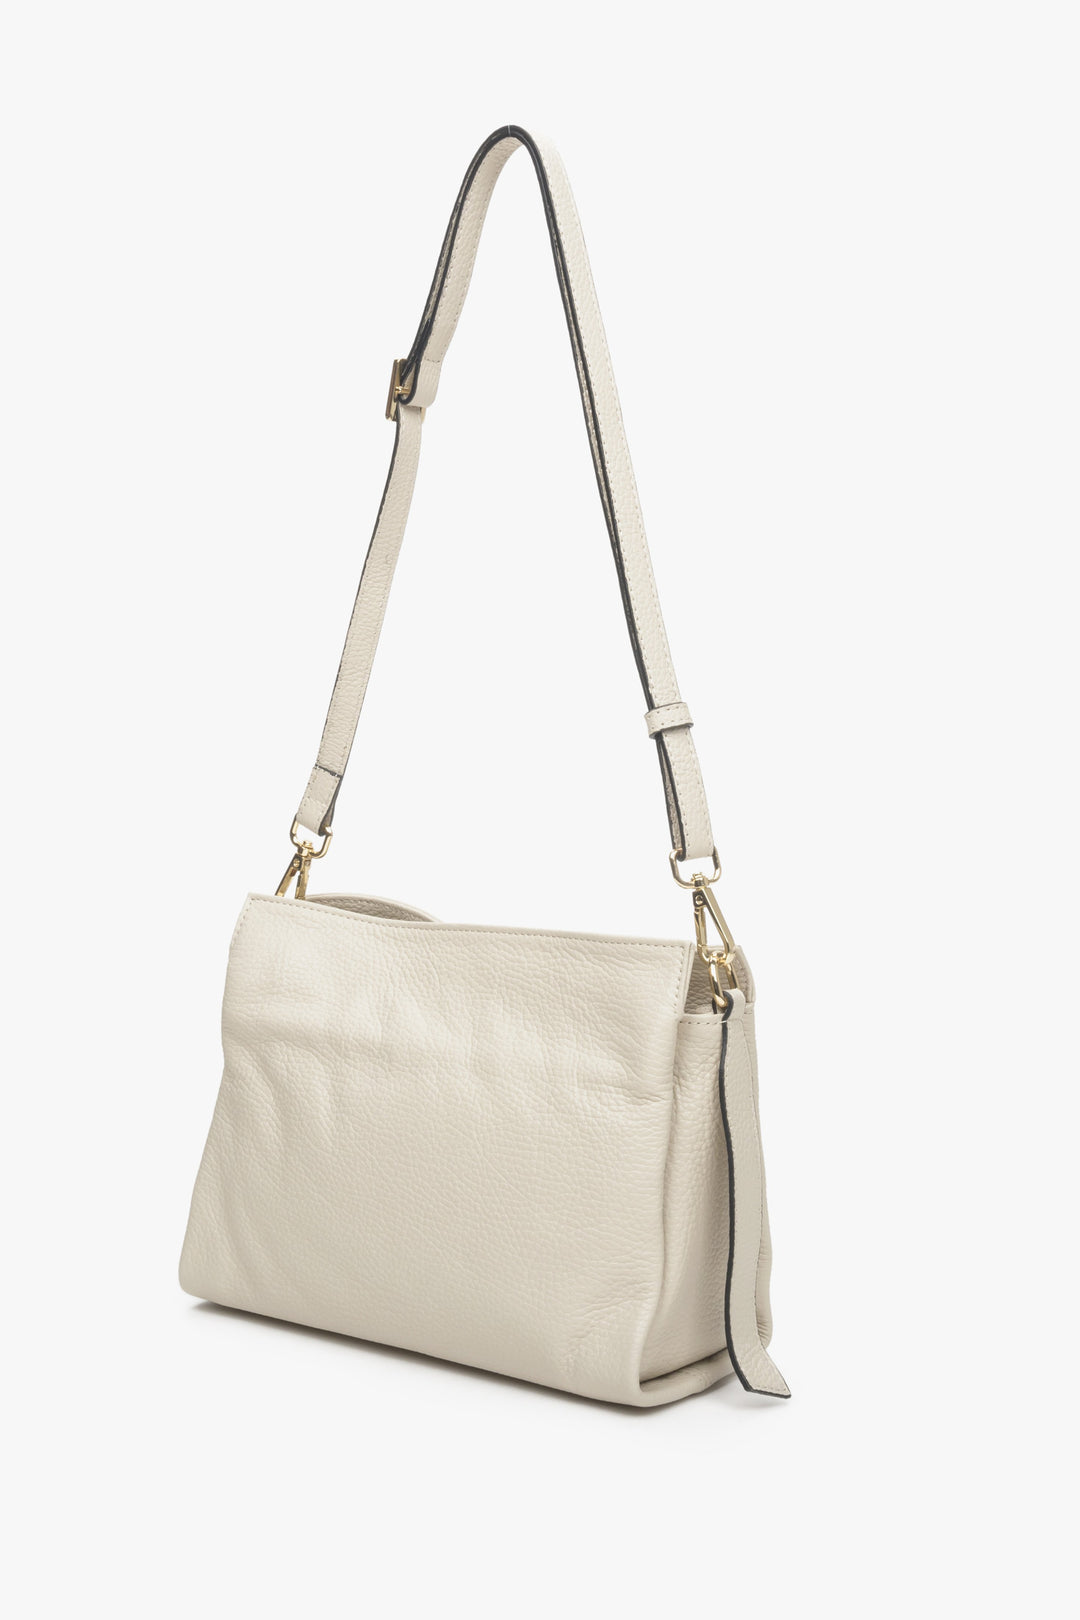 Beige leather women's crossbody bag by Estro with a long strap.